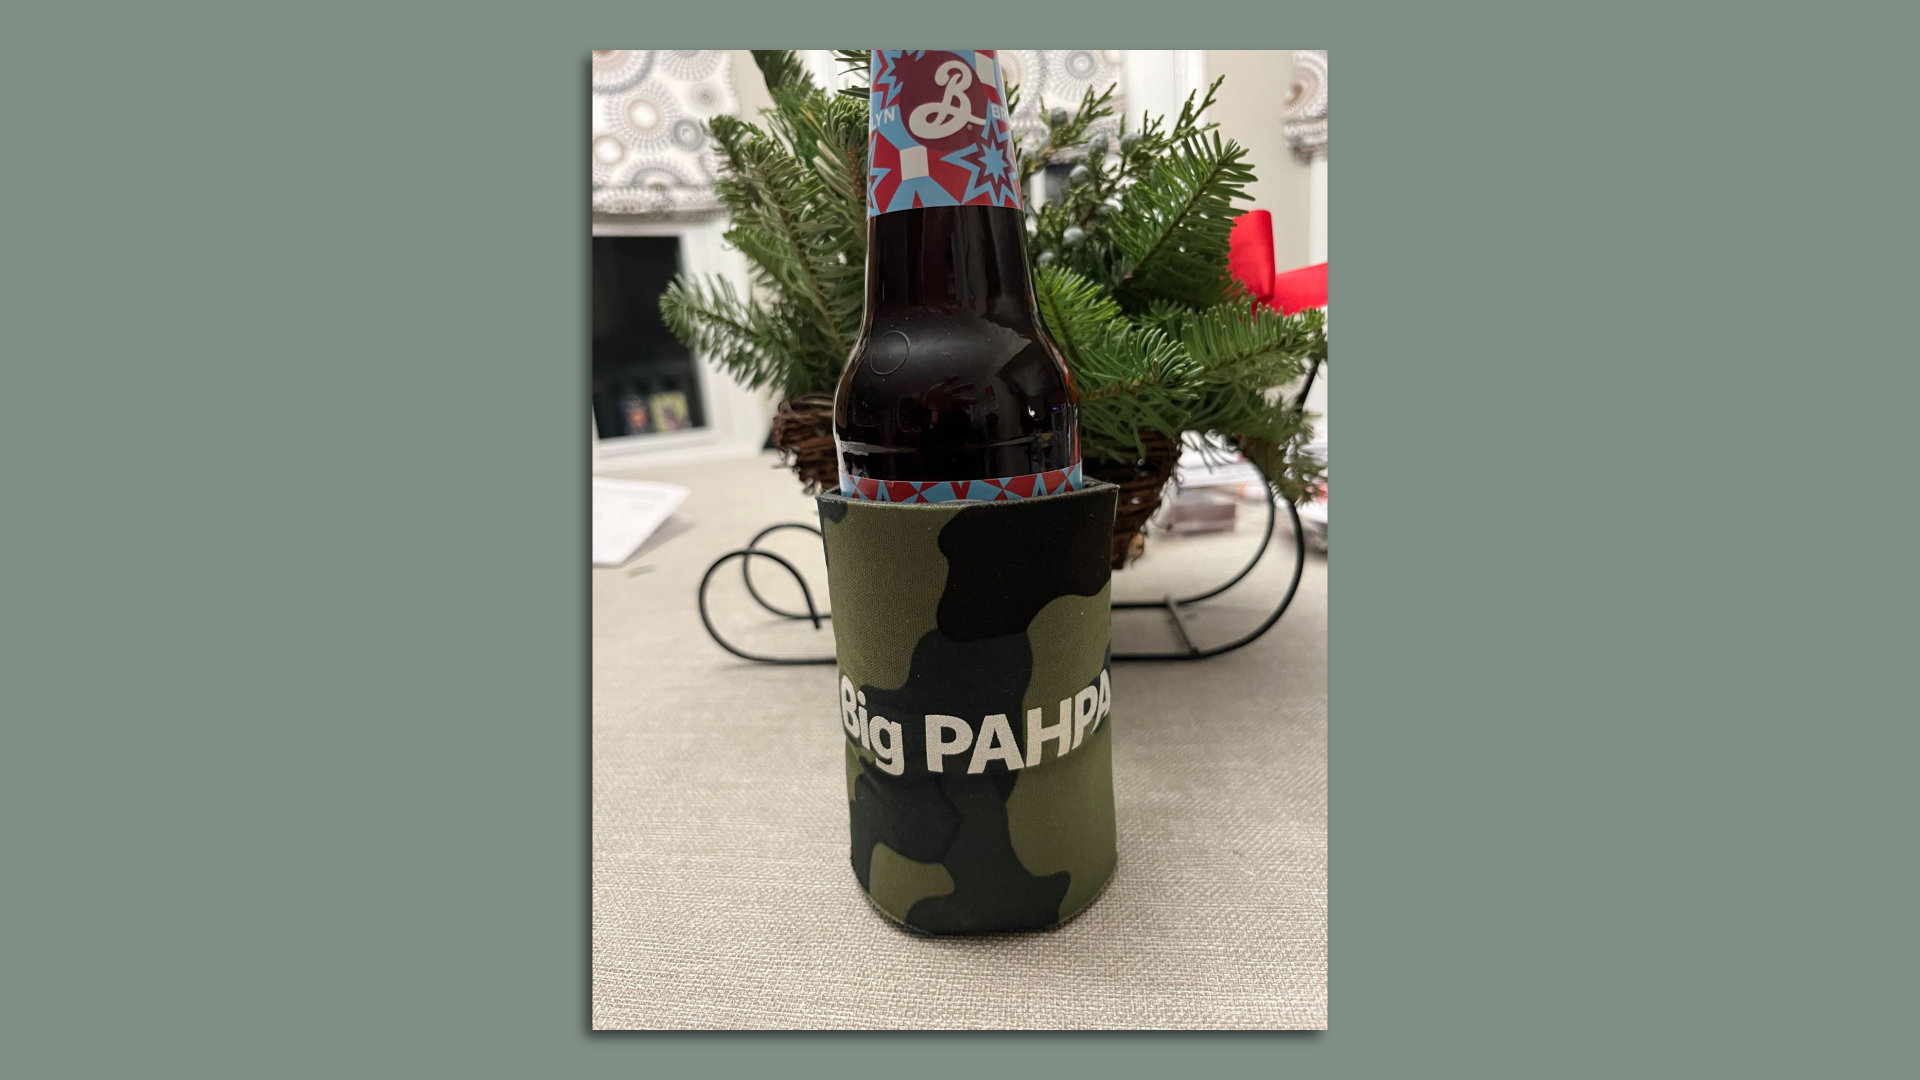 Image of a beer bottle in a drink koozie that reads "Big PAHPA"